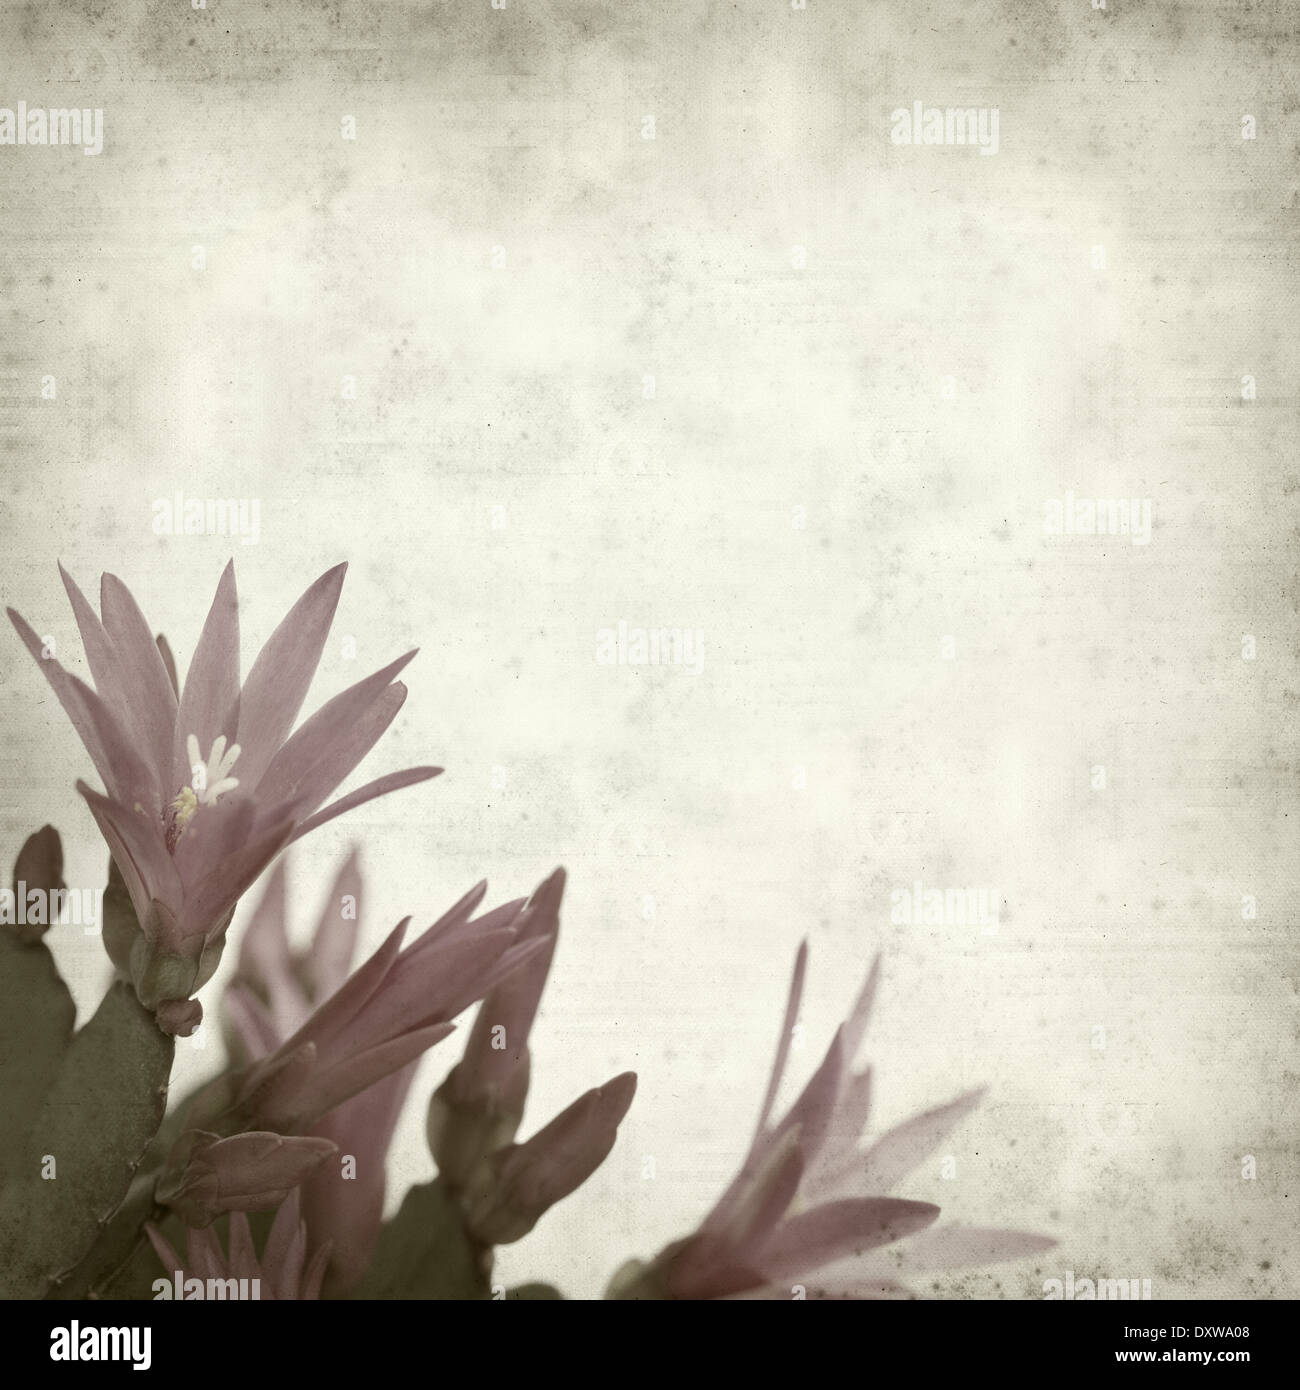 textured old paper background with Christmas cactus Stock Photo